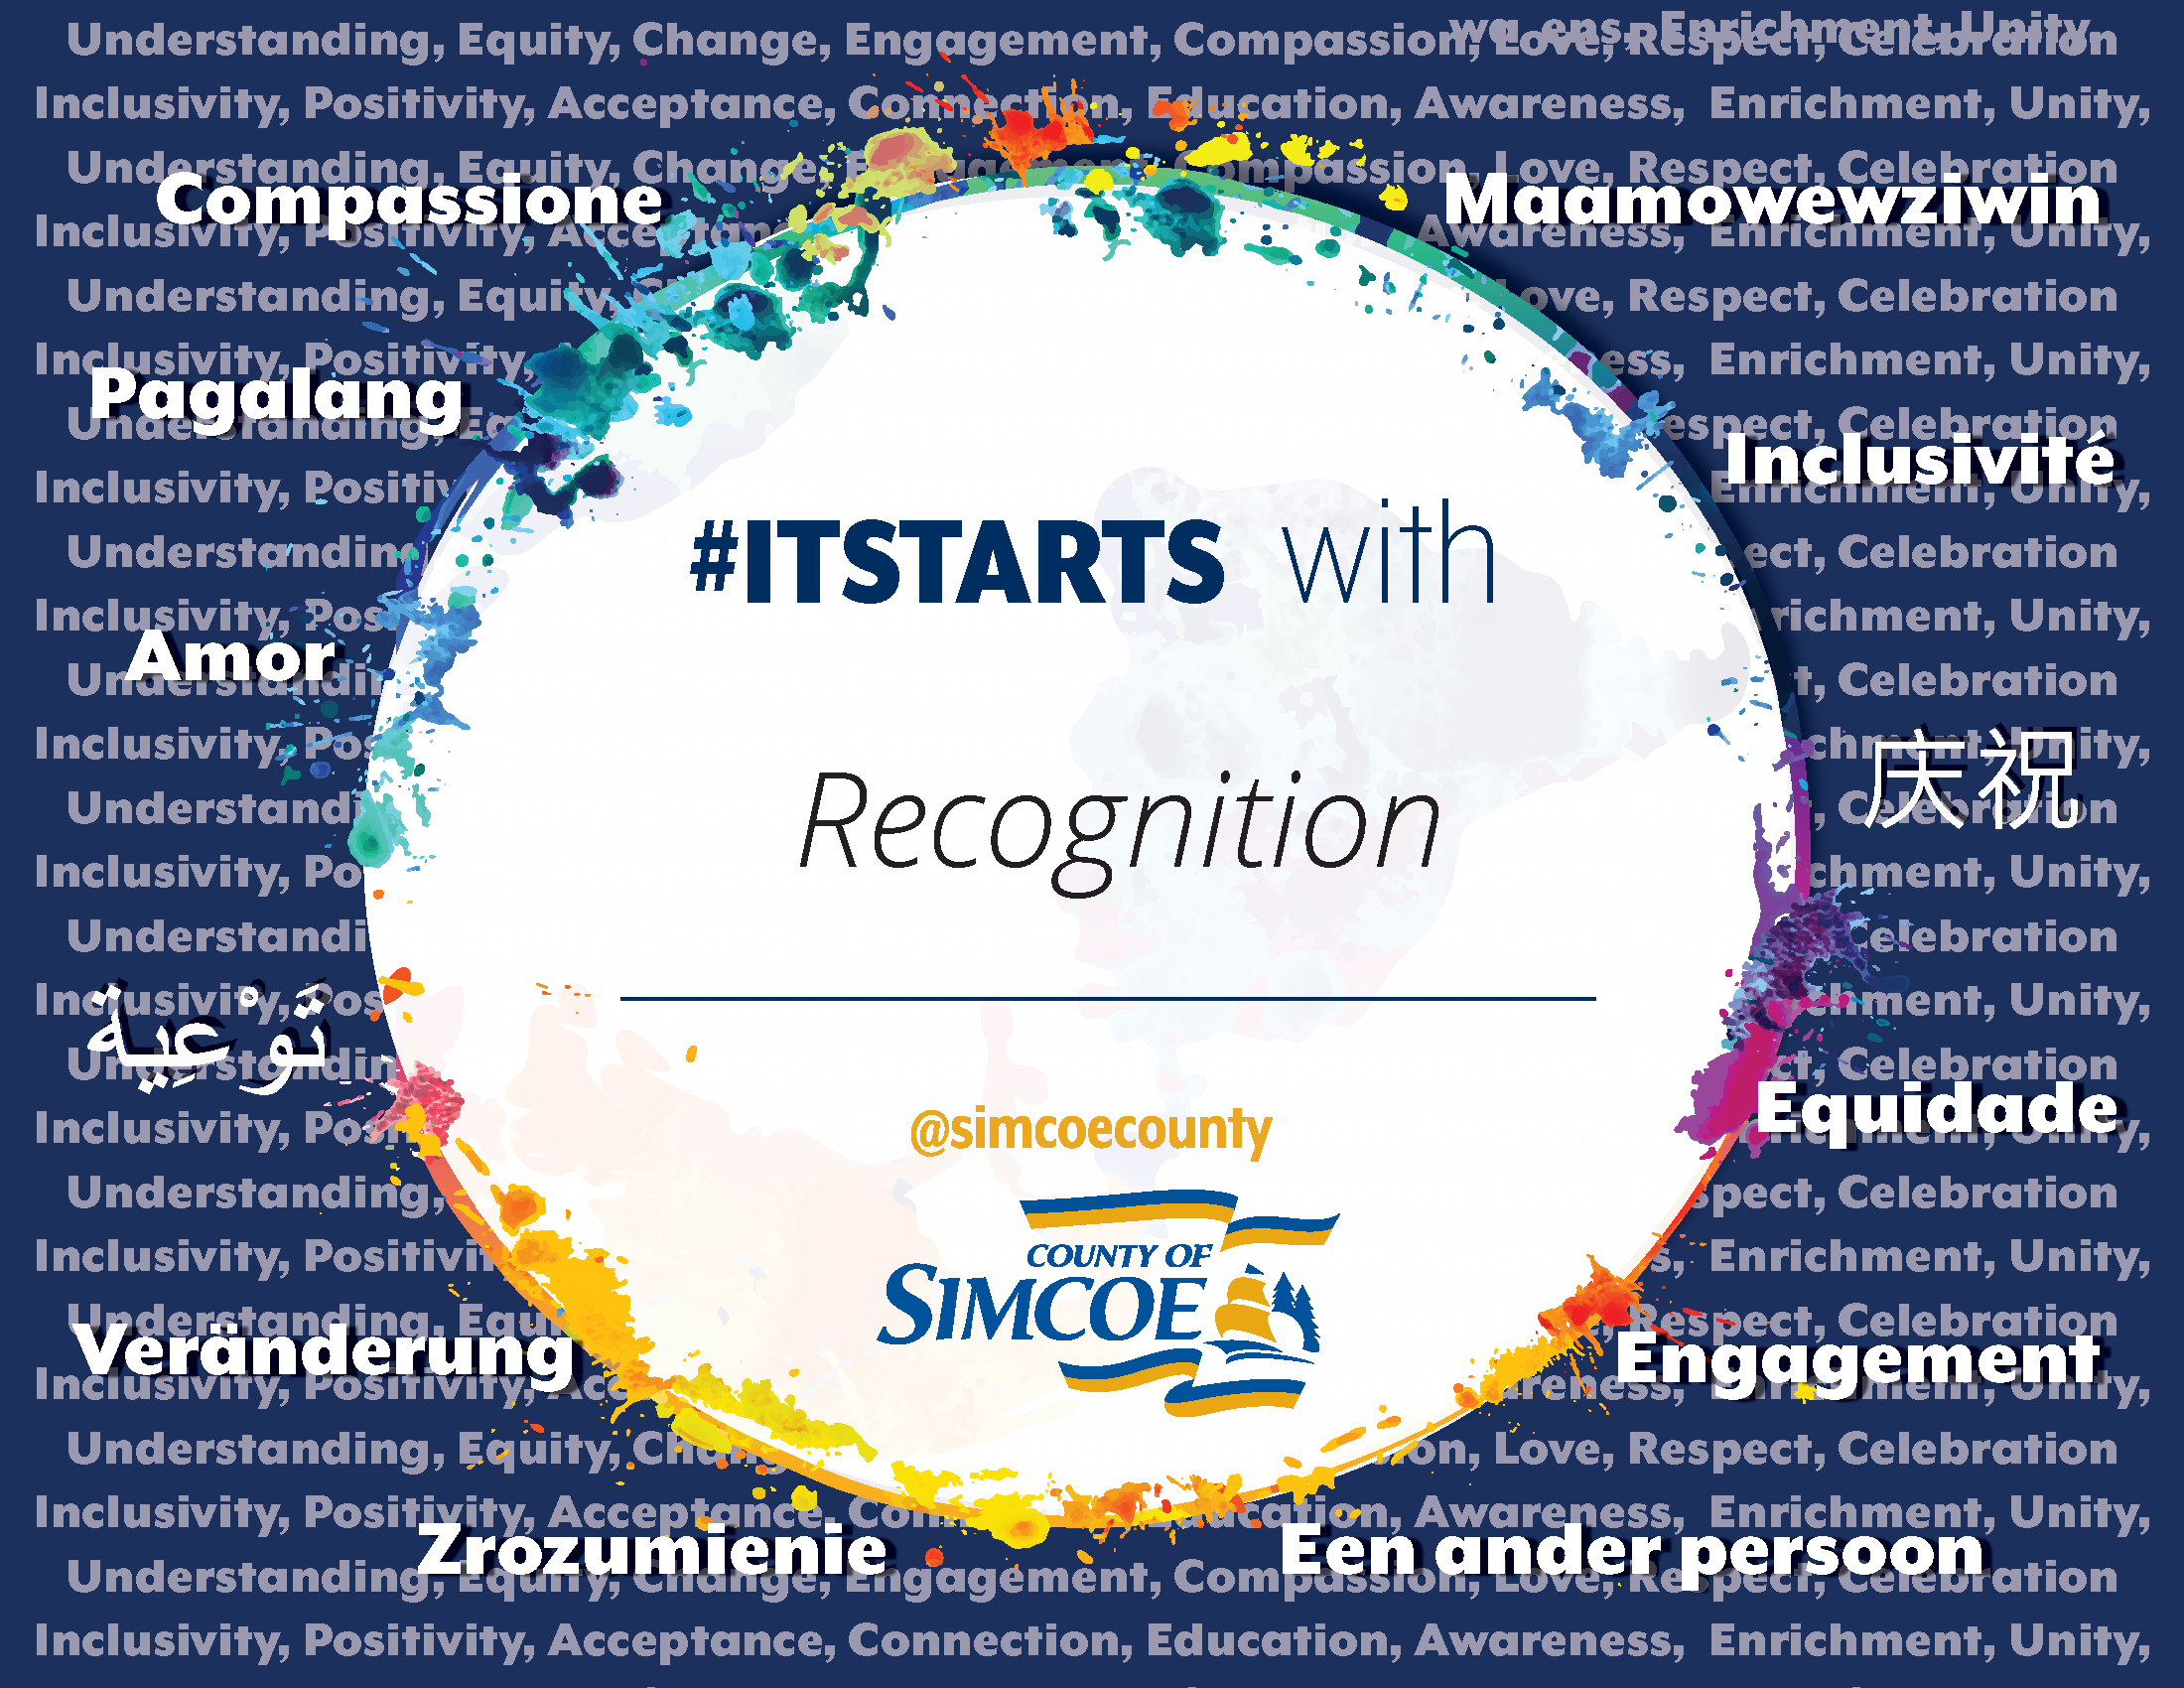 #ItStarts image courtesy of the County of Simcoe 